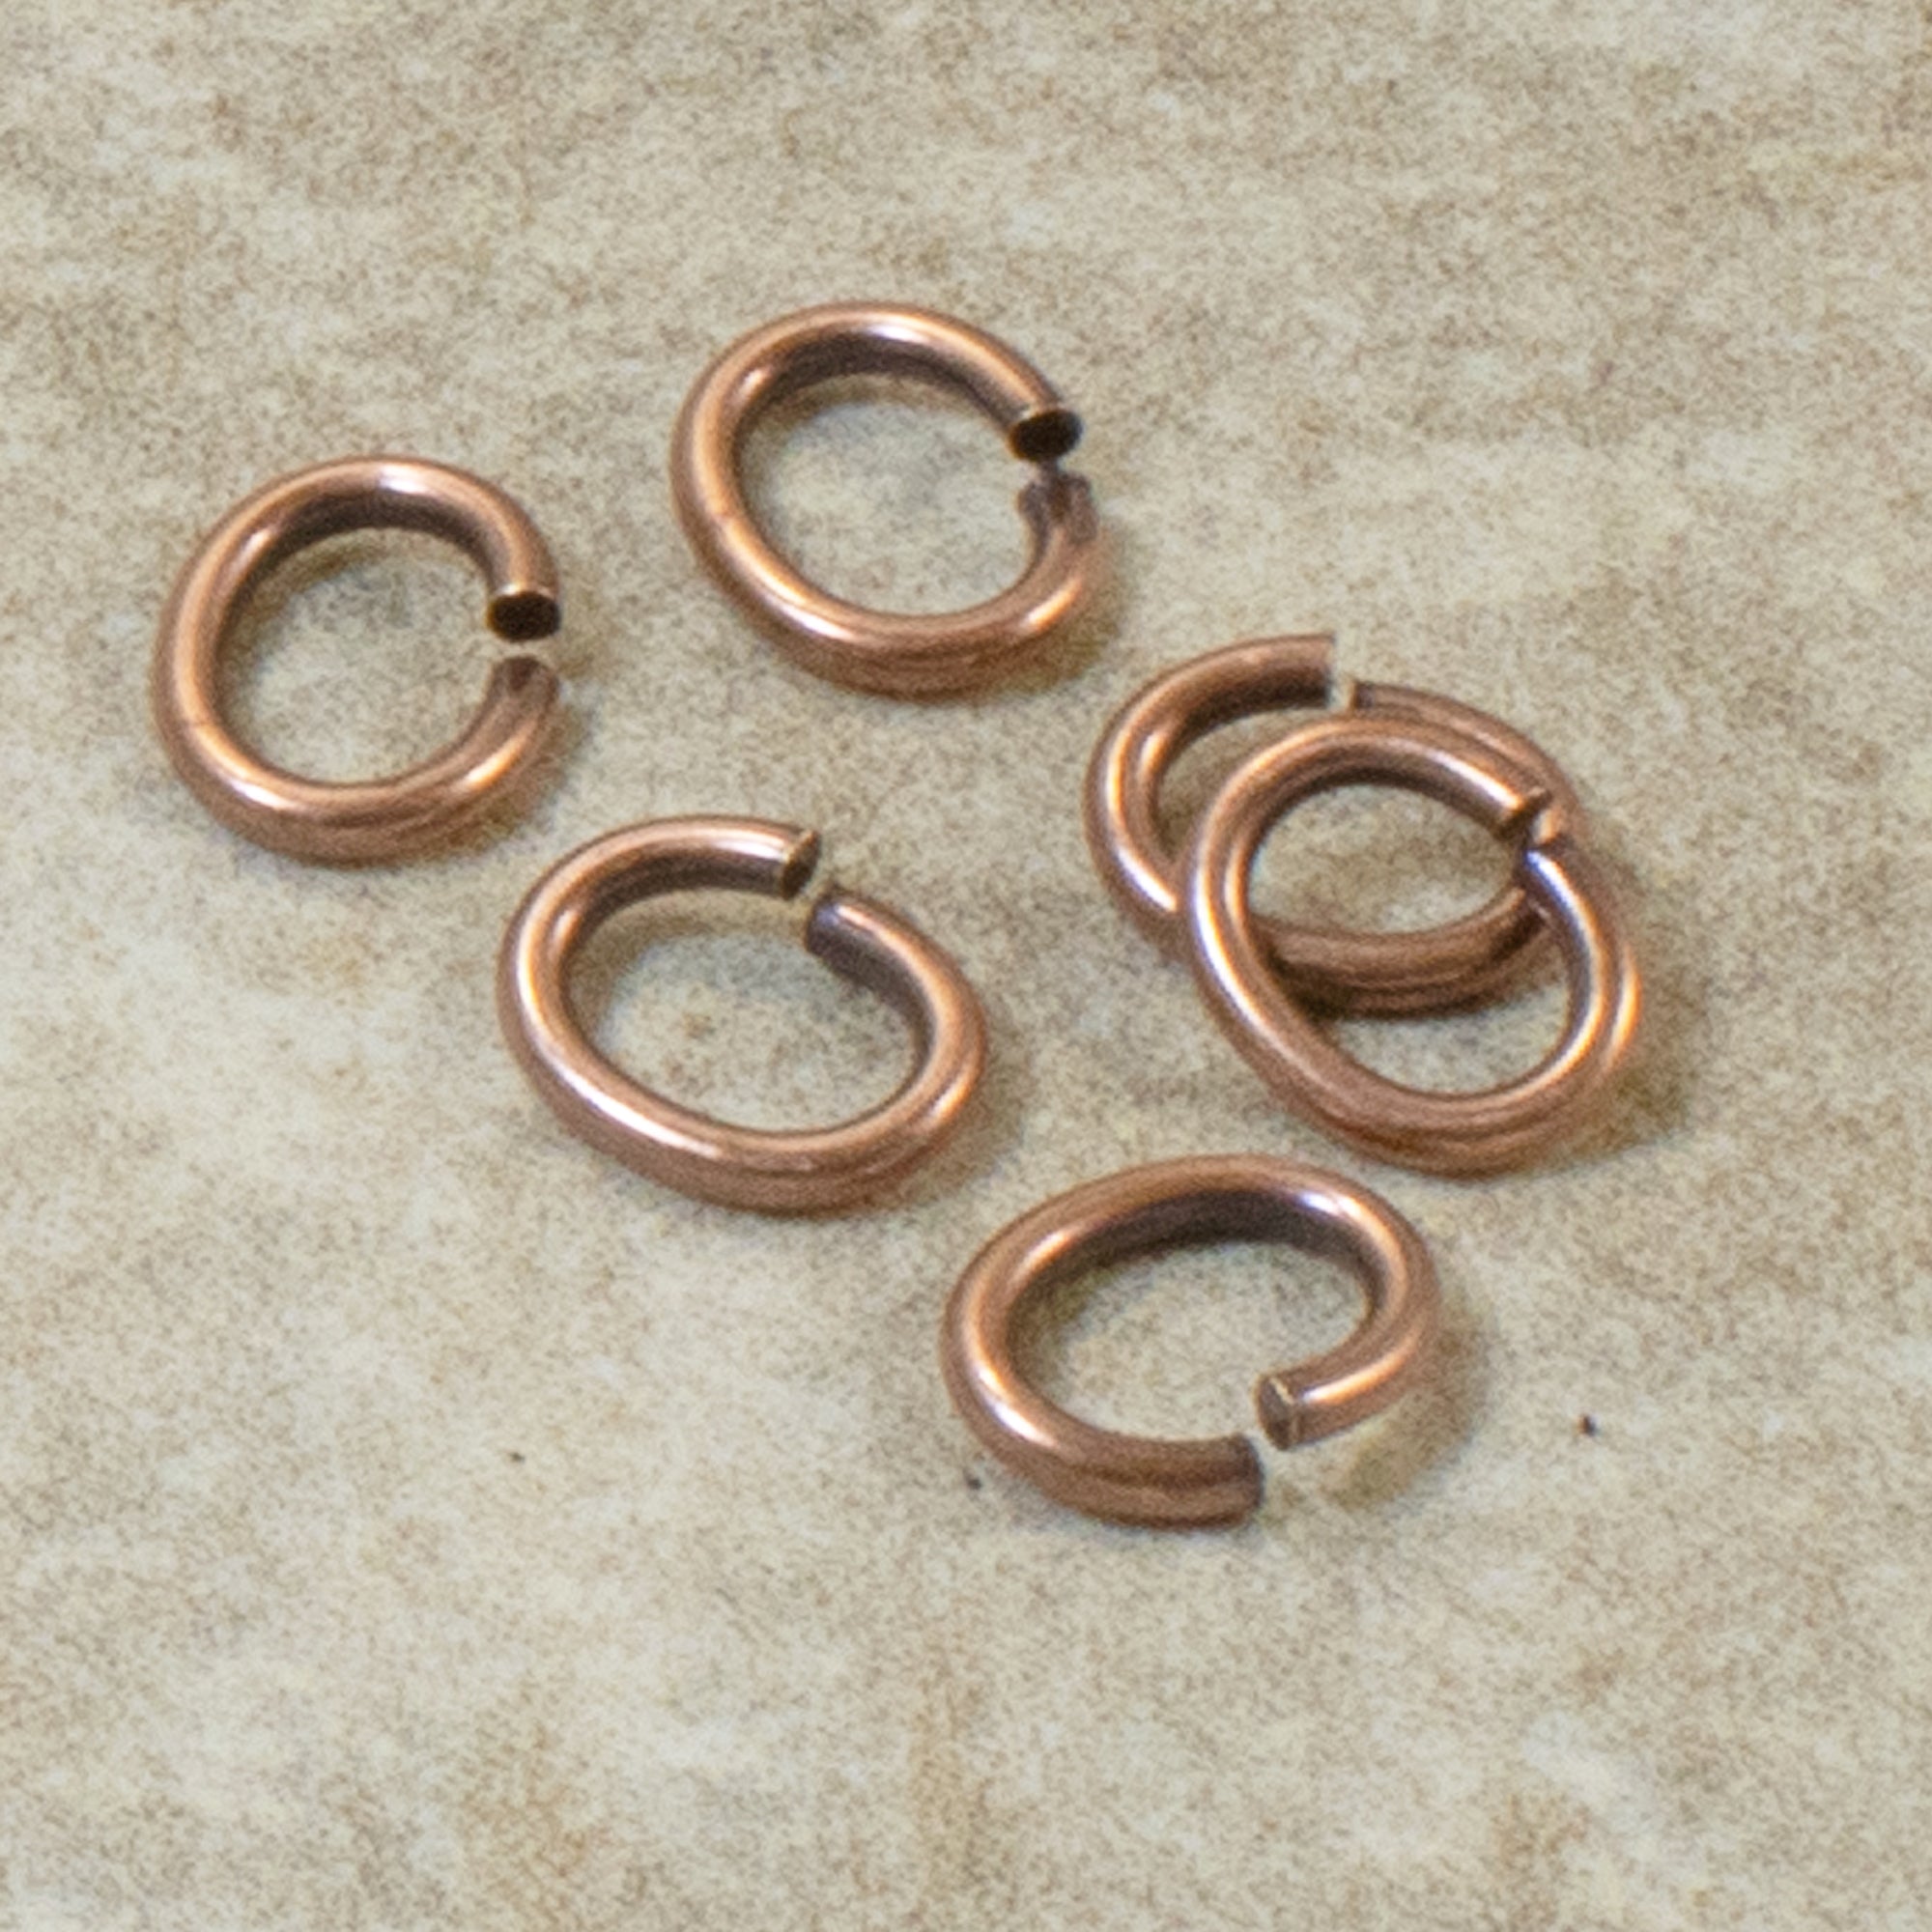 Wholesale Black Oval Jump Rings for Jewelry Making - TierraCast